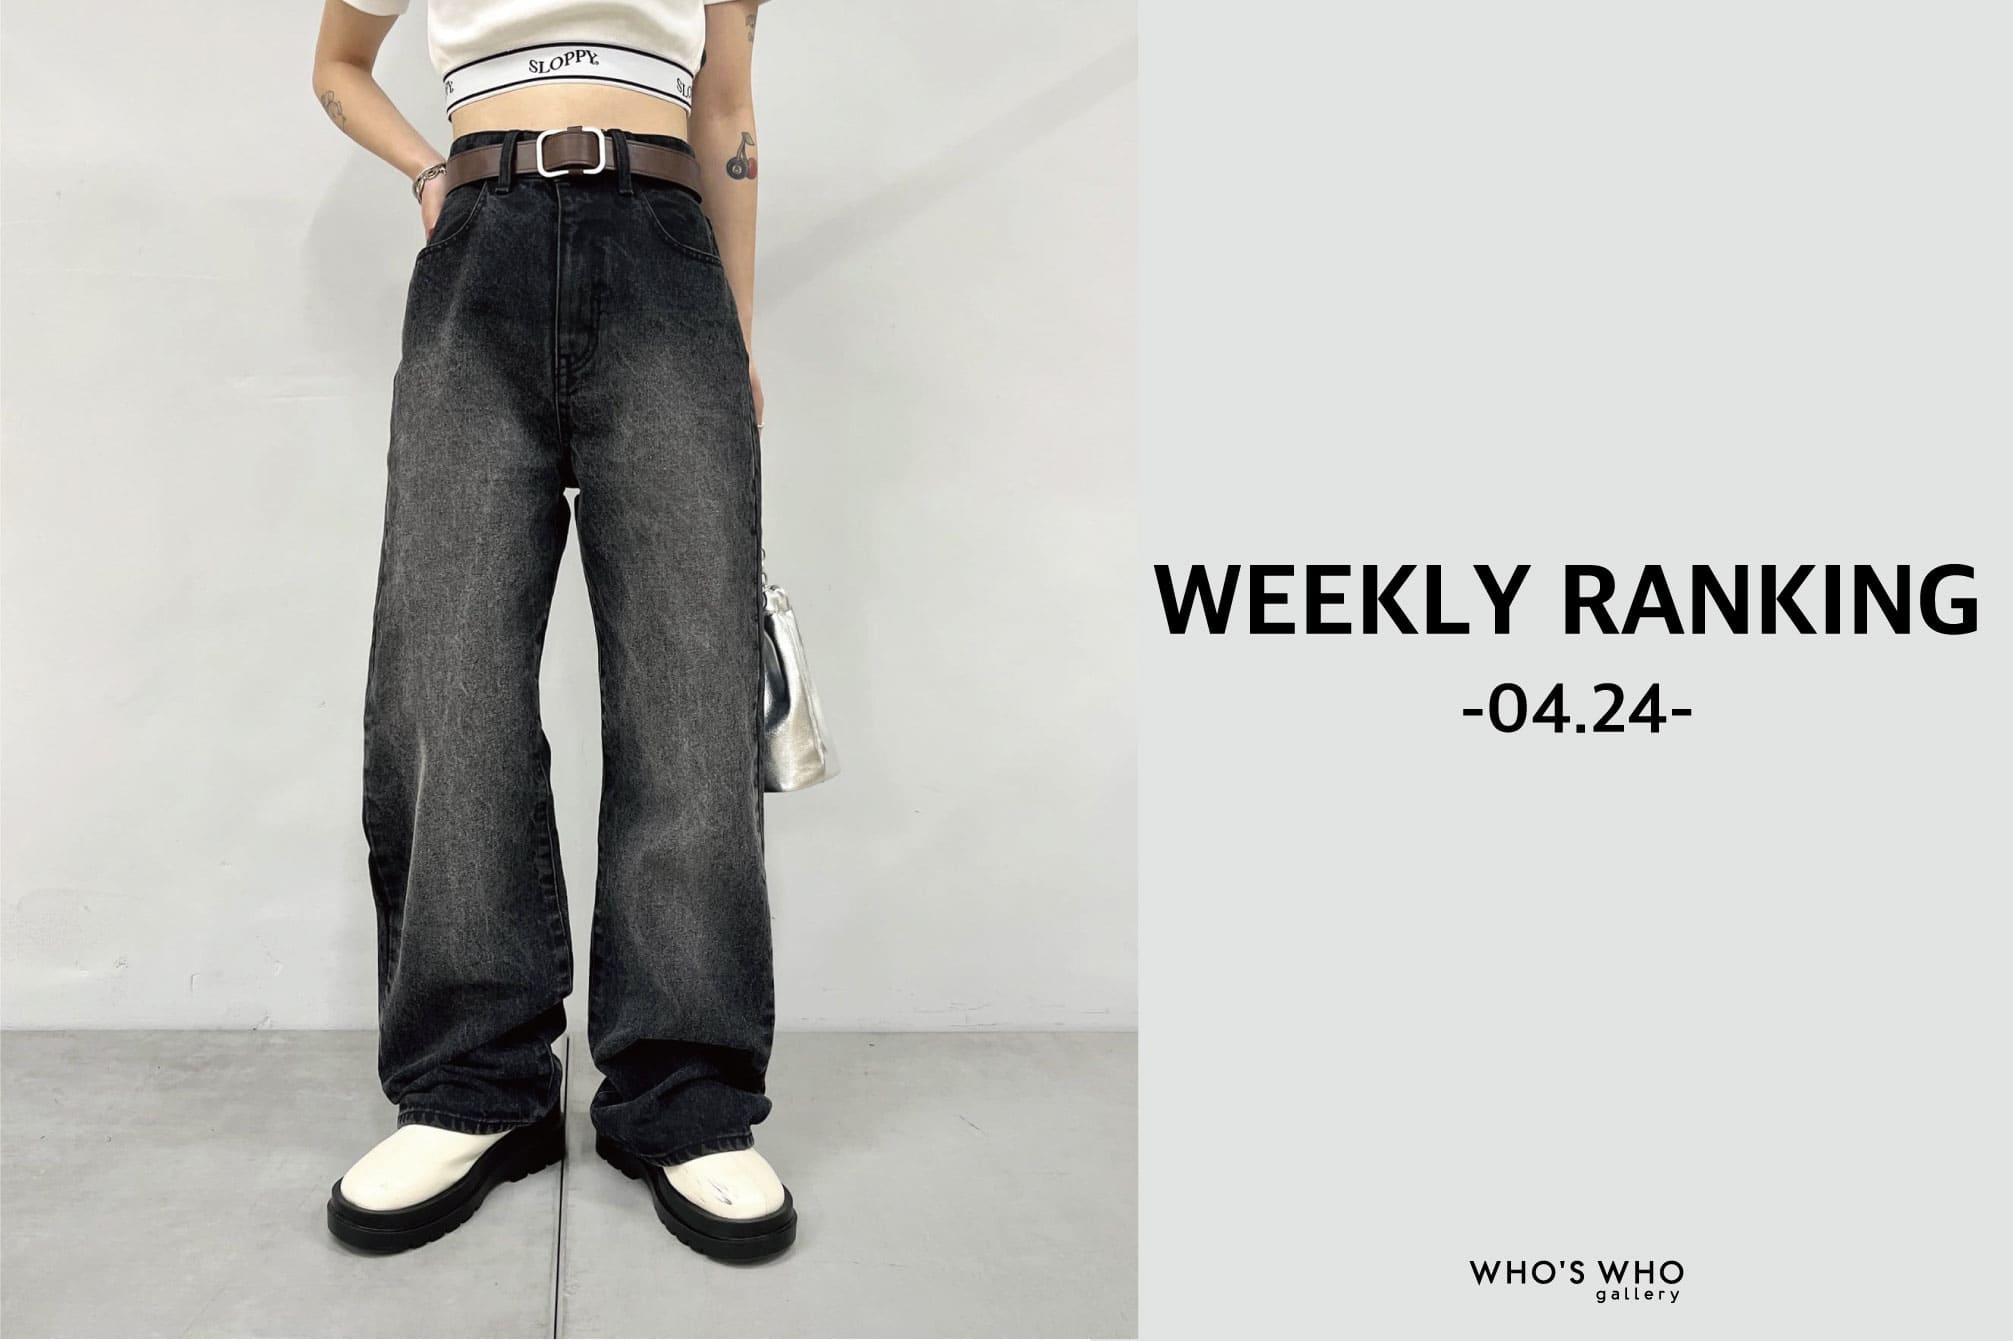 WHO’S WHO gallery 【WEEKLY RANKING -04.24-】